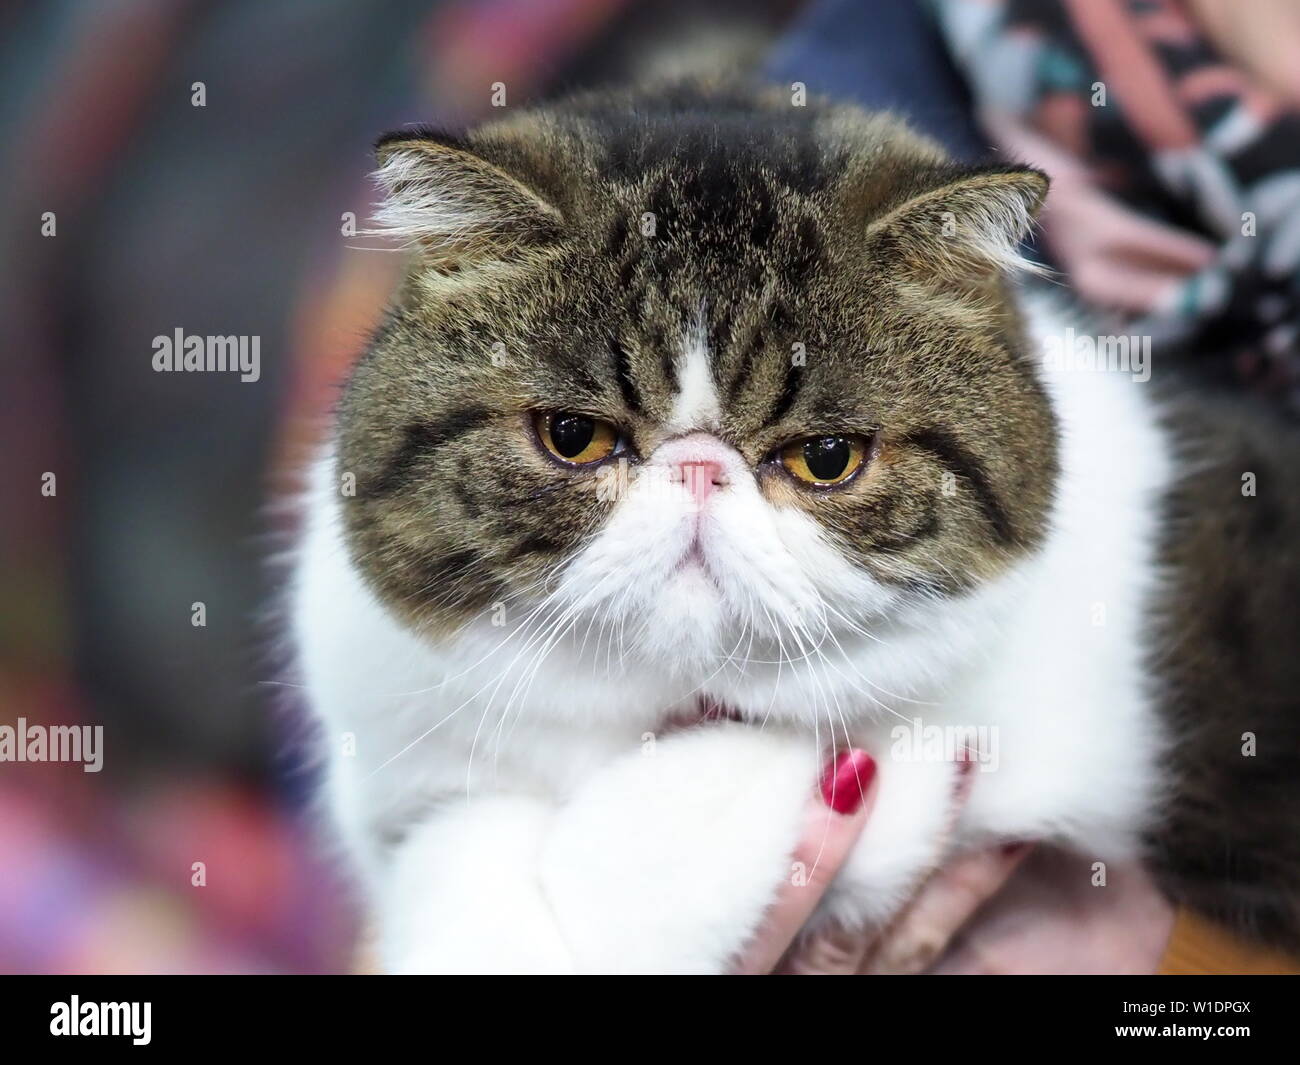 May 2019 – Face of A Pedigree Cat – An Exotic Shorthair Looking Straight at The Camera Stock Photo